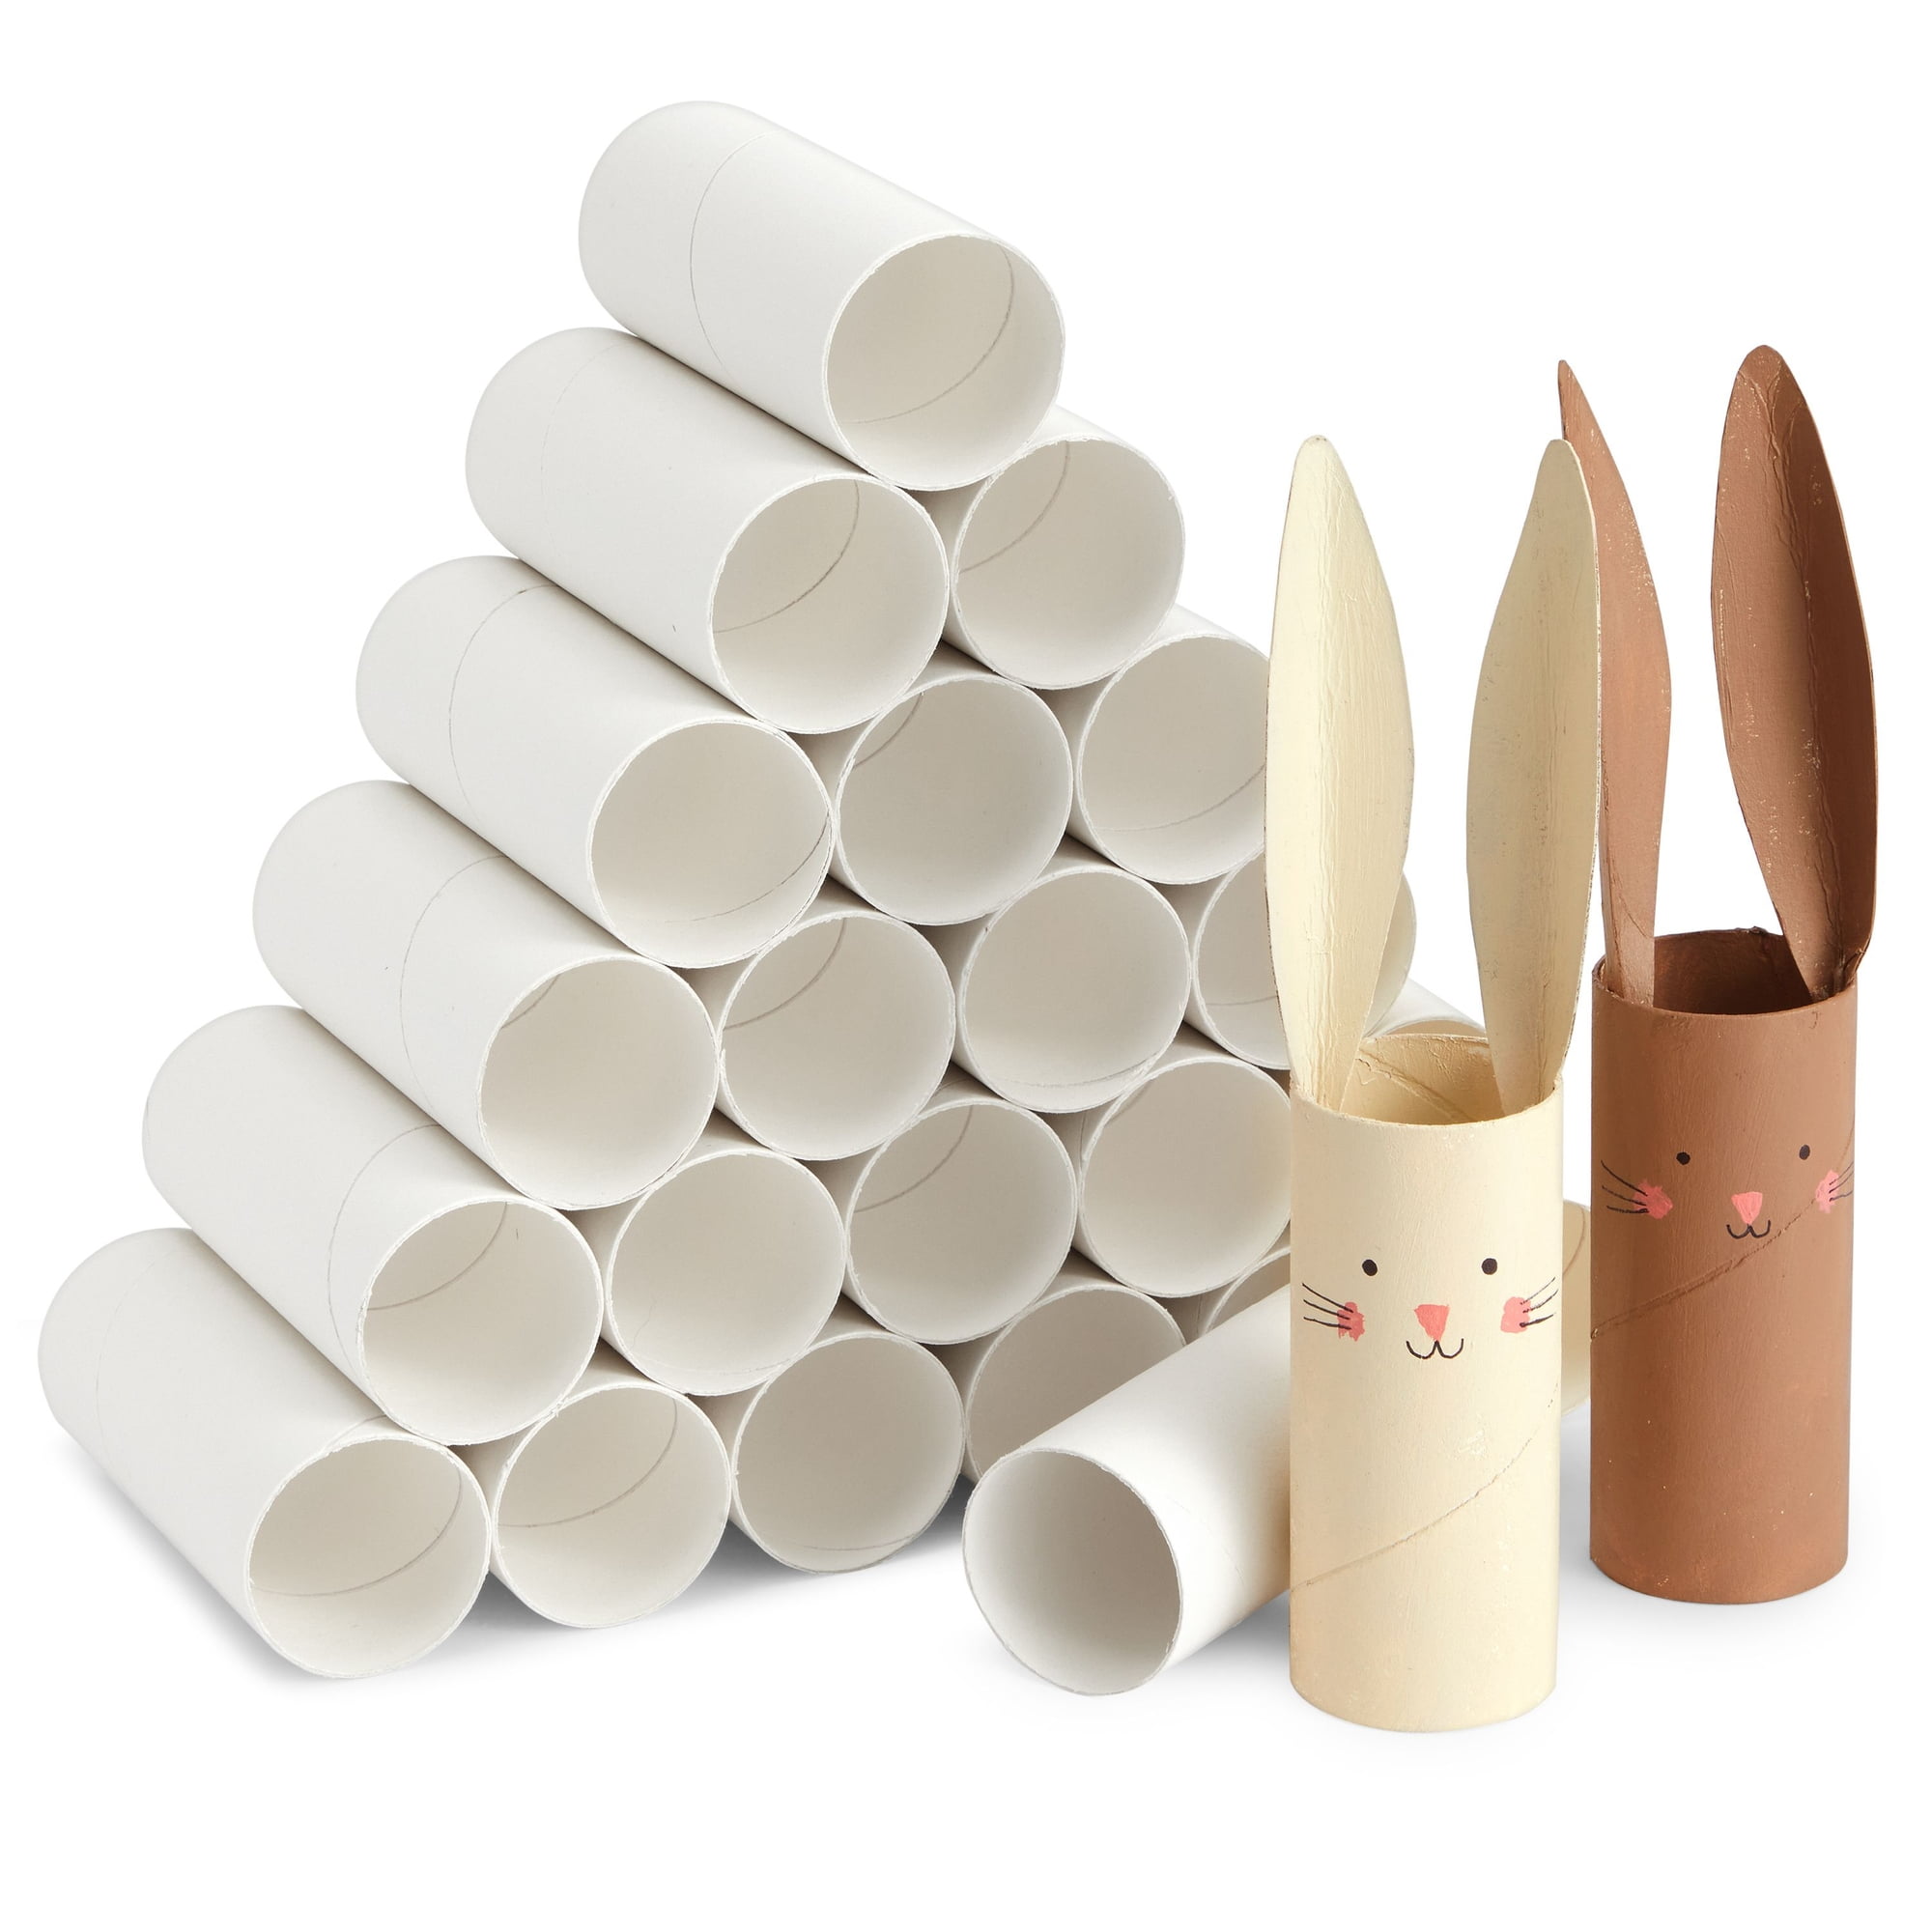  Baluue 5pcs Poster Tube Postal Tubes for Poster Tube with End  Caps Convenient Postal Tube Document Tube Postal Tubes for Artworks Paper  Tube Paper Mural Storage Bucket Fishing Rod Abs 